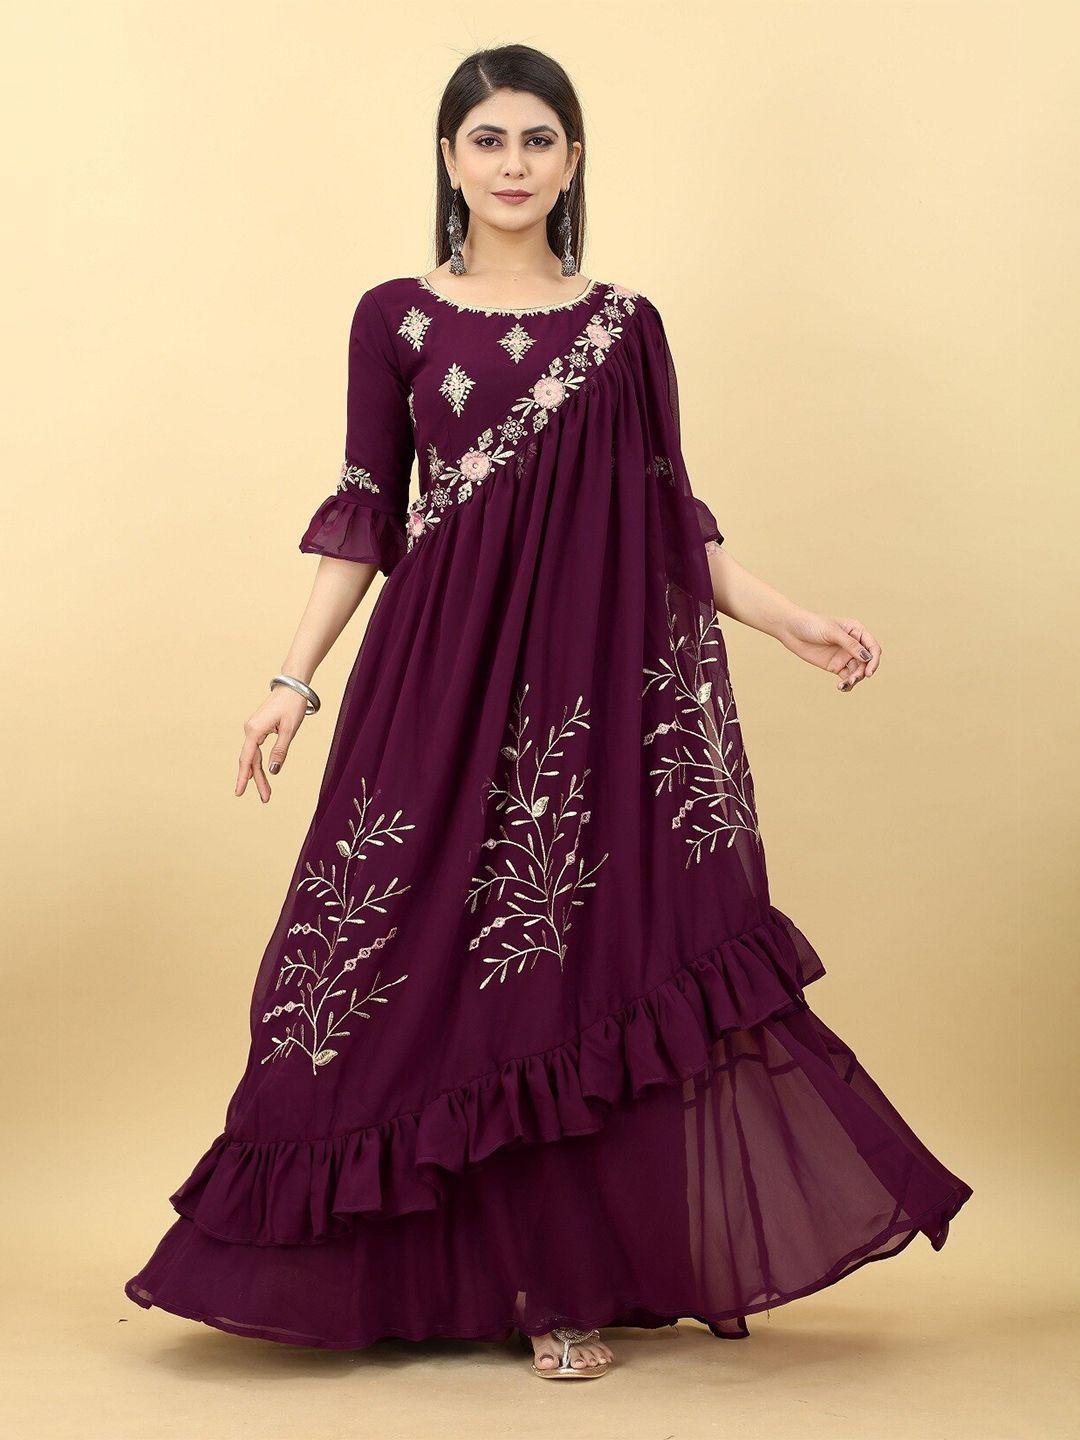 yoyo-fashion-floral-embroidery-bell-sleeves-georgette-ethnic-dress-with-dupatta